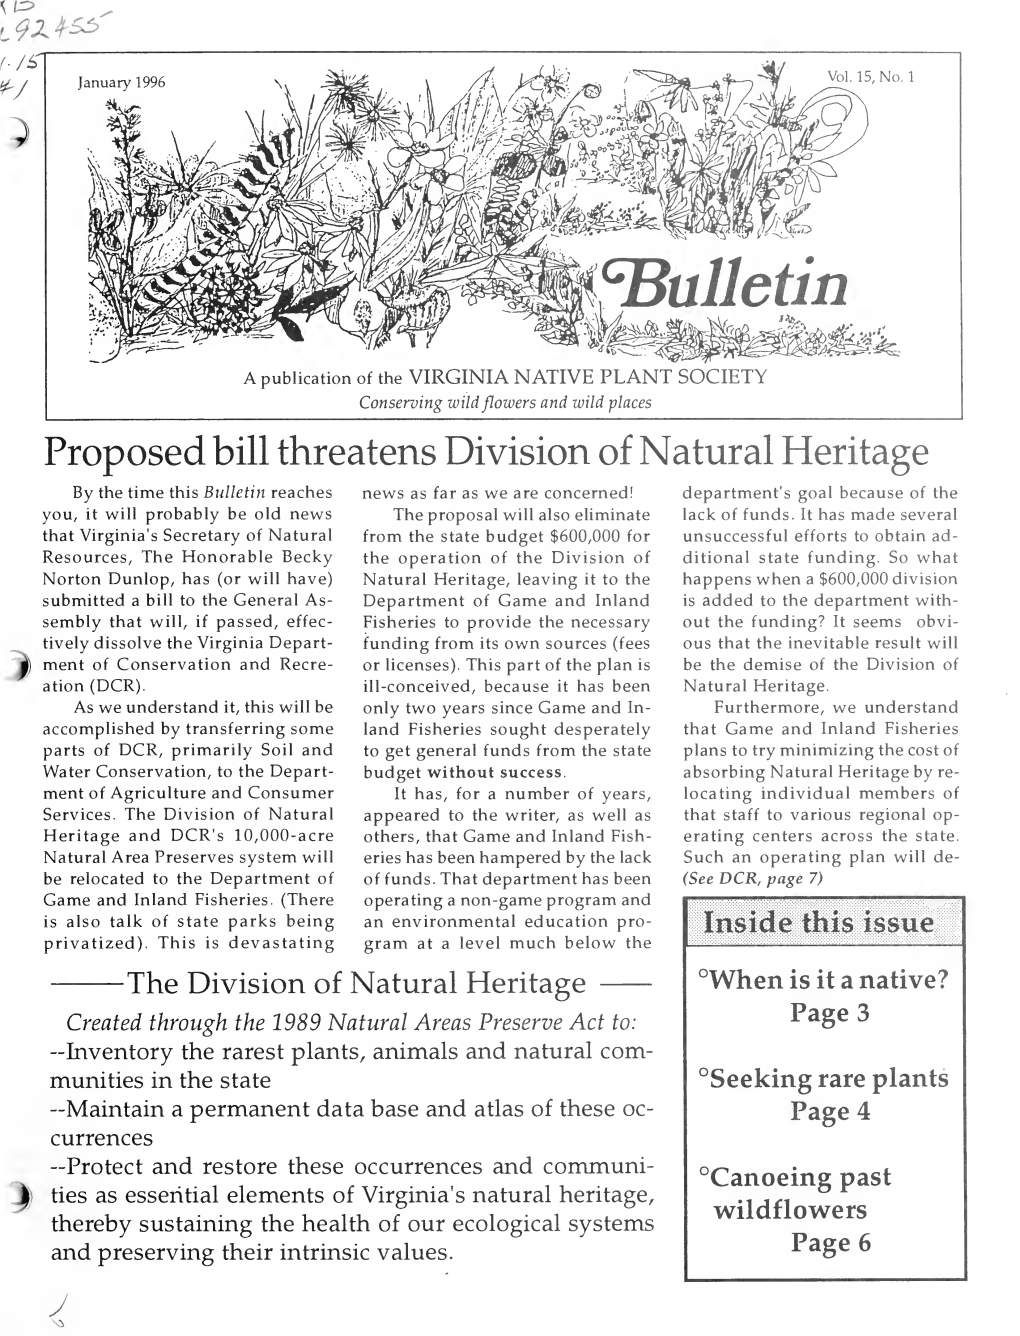 Proposed Bill Threatens Division of Natural Heritage J